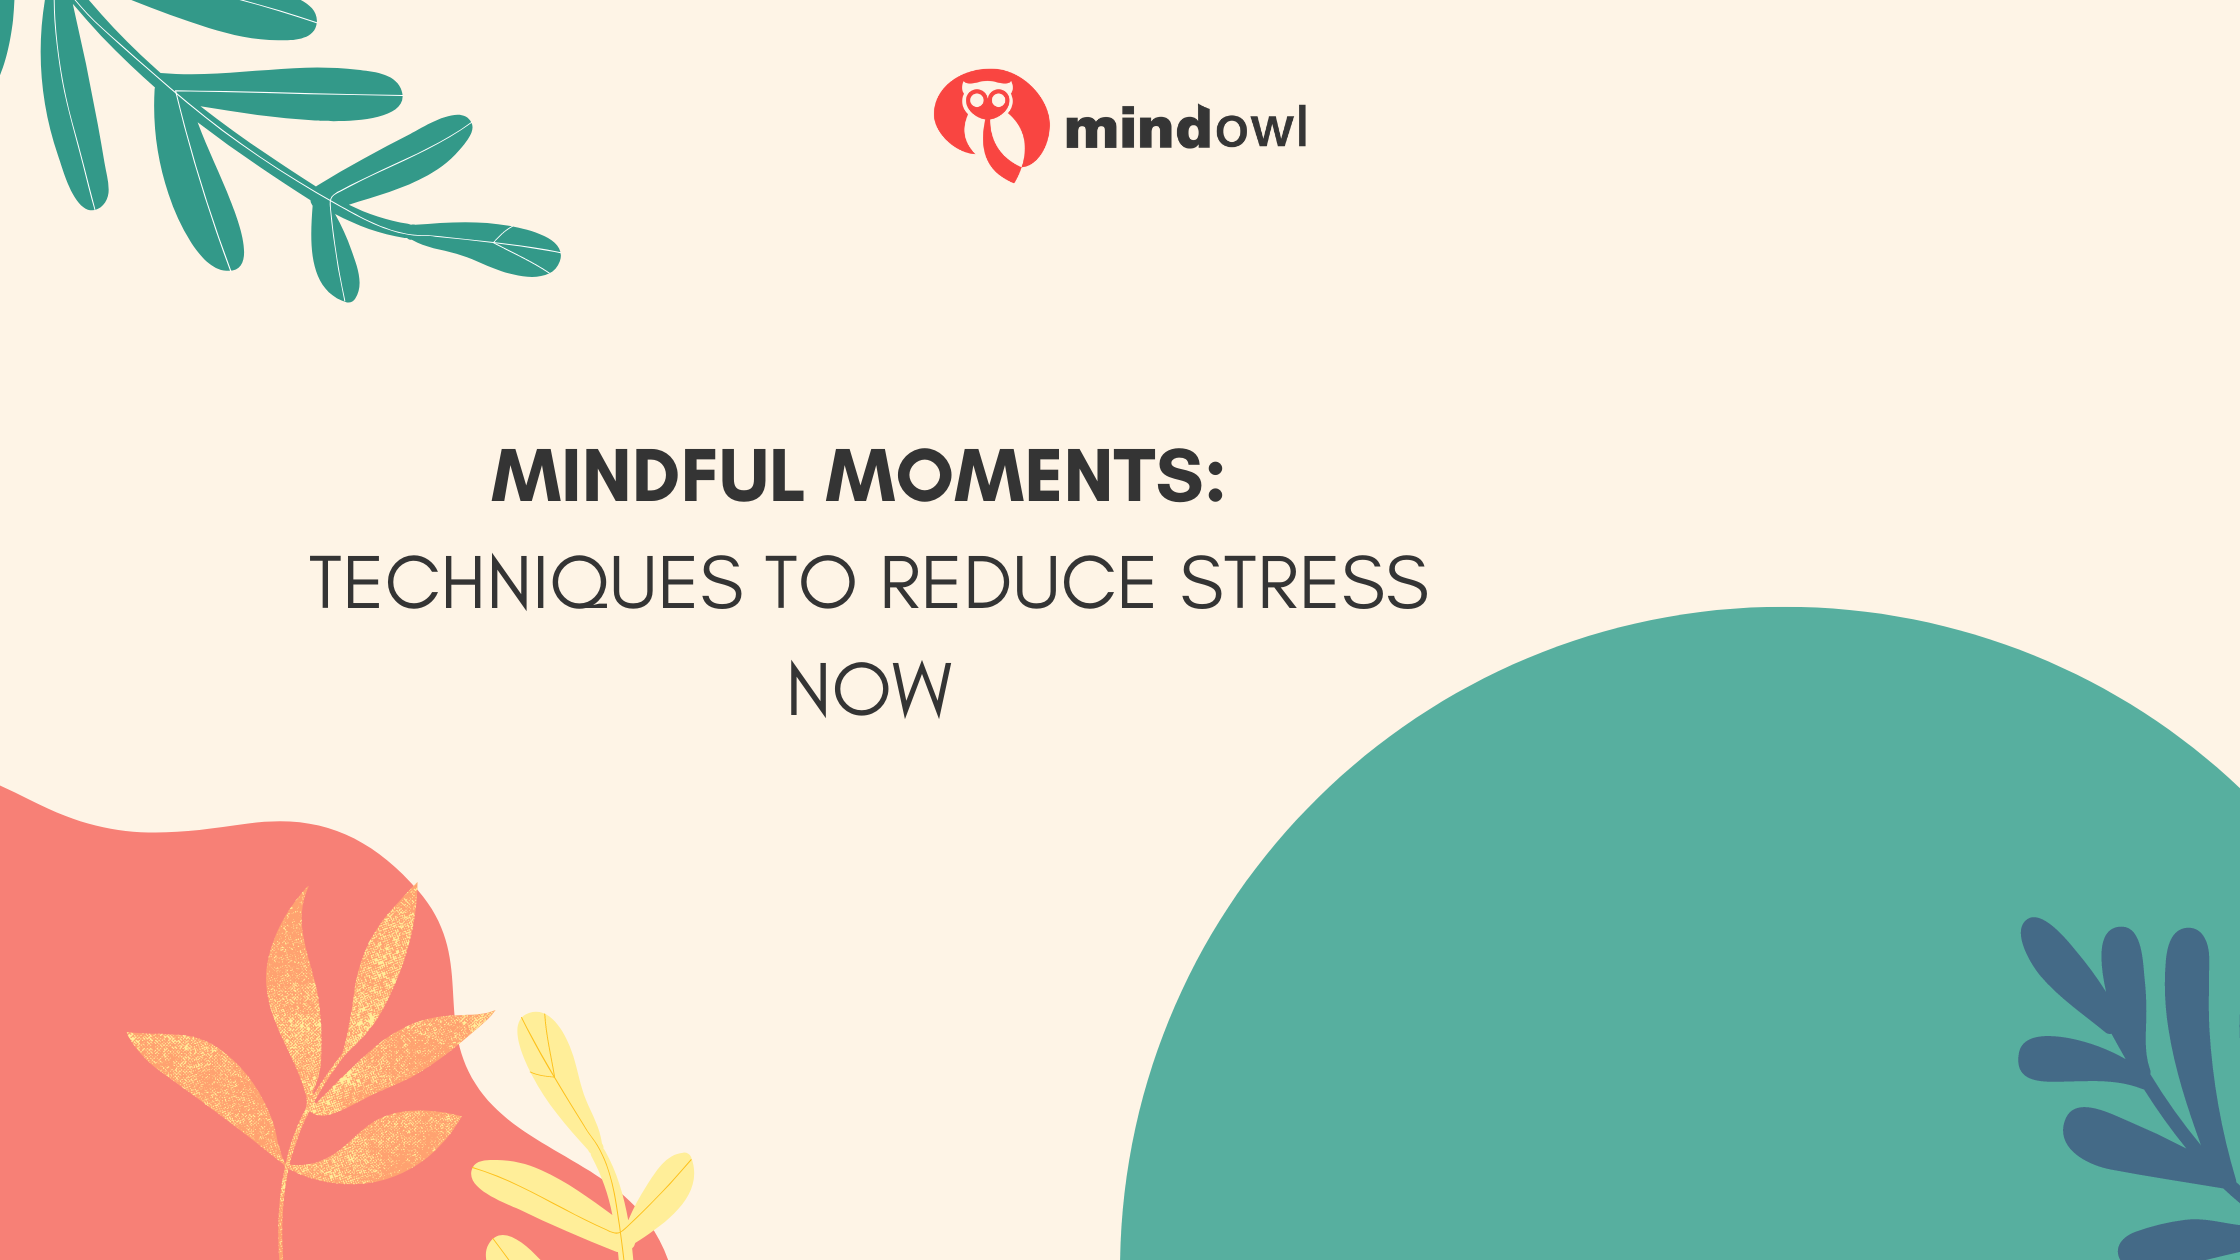 Mindful Moments: Techniques to Reduce Stress Now